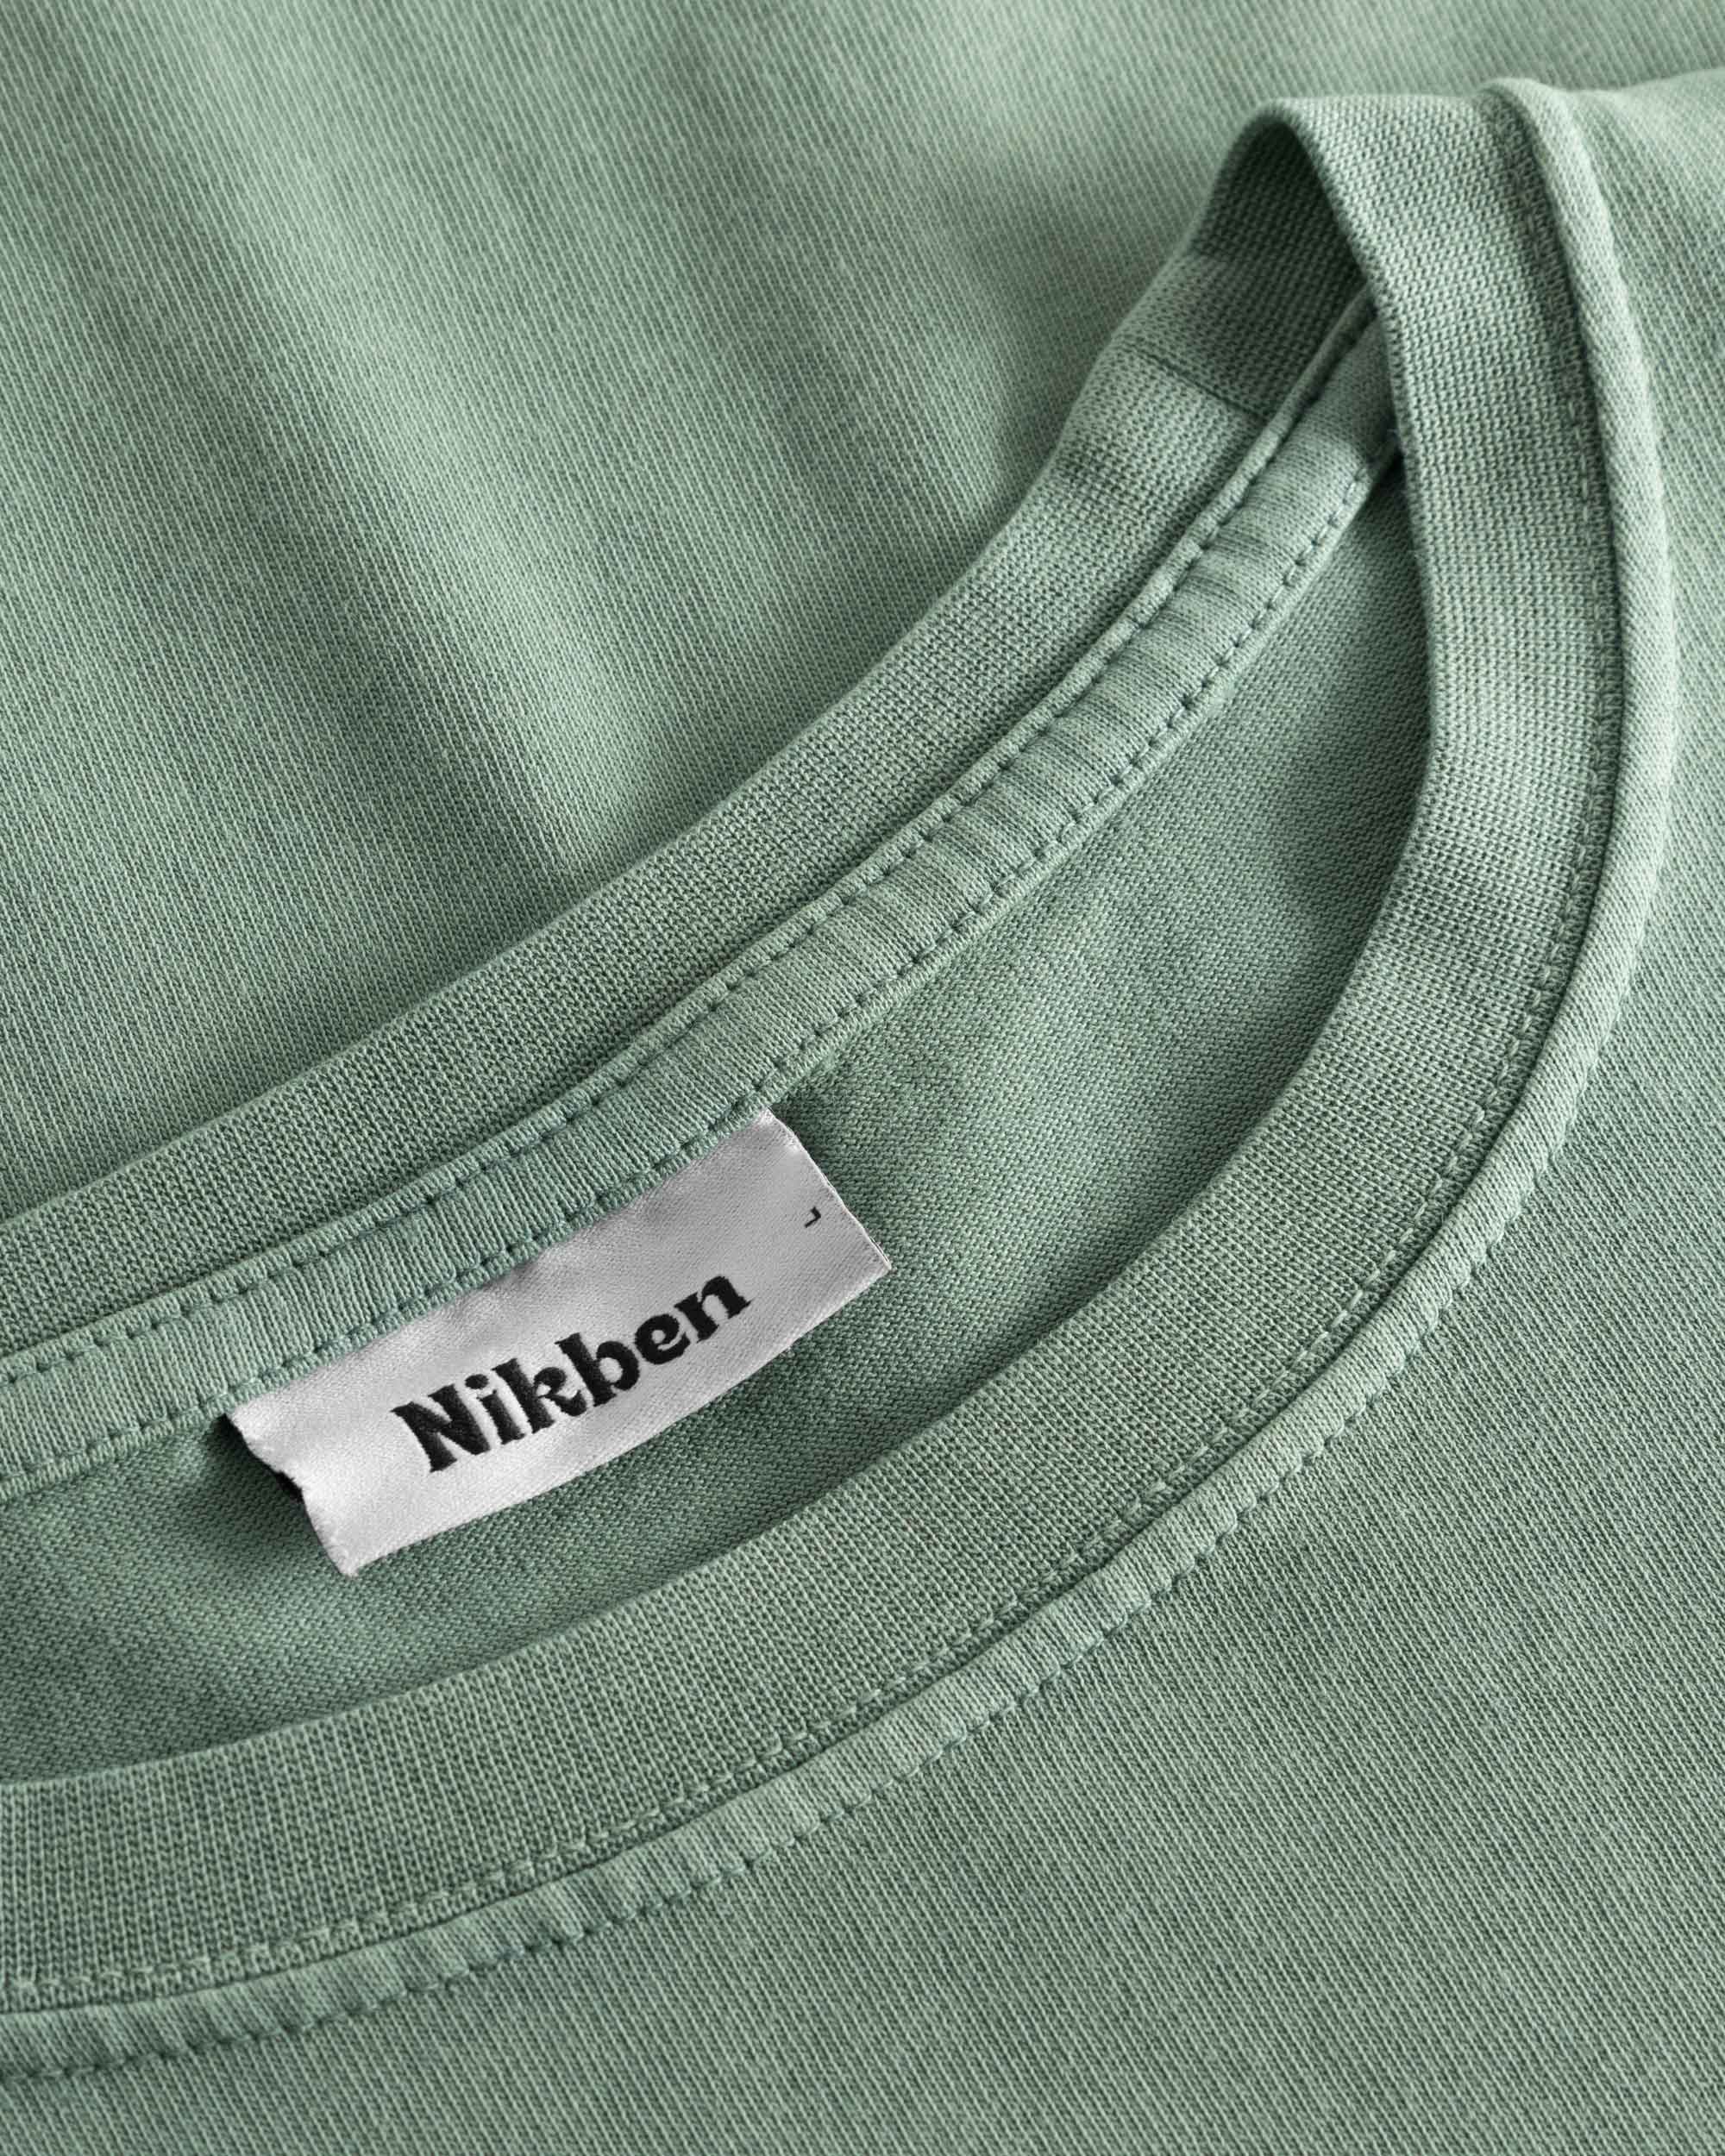 Close-up view of the round neck and stitchings on a green t-shirt